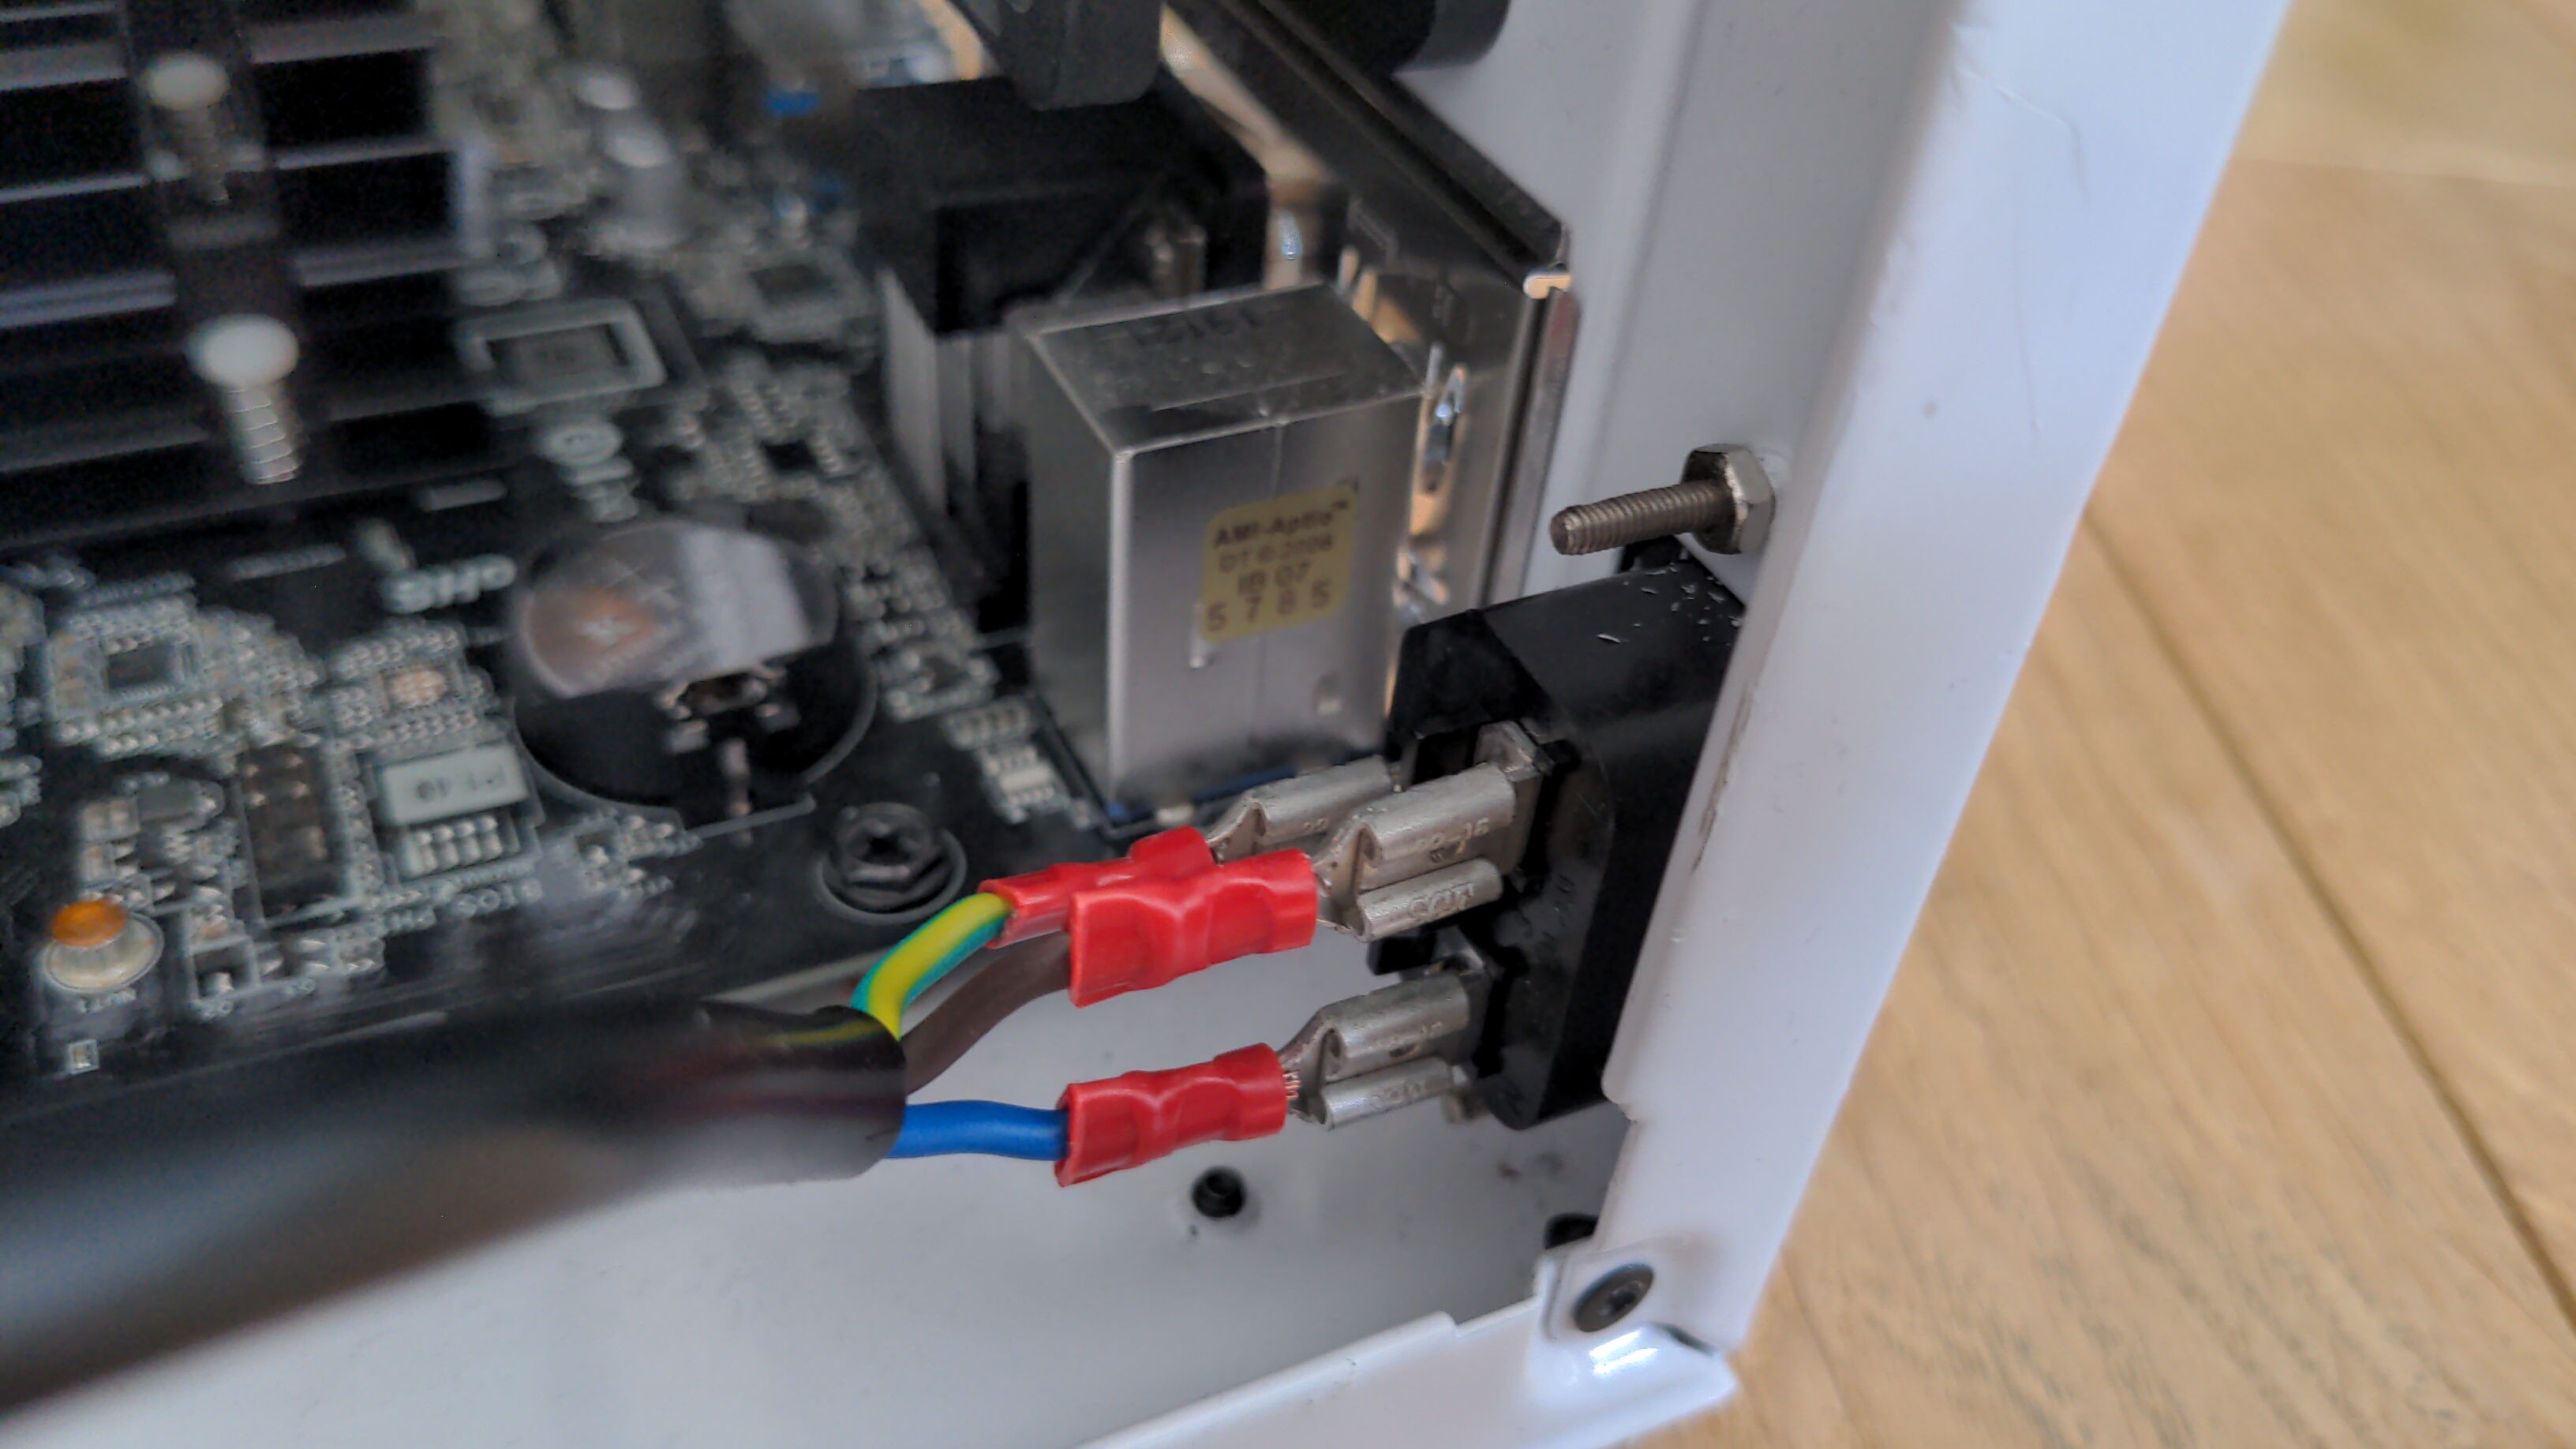 Close-Up of previous picture, showing the socket with the crimped wires